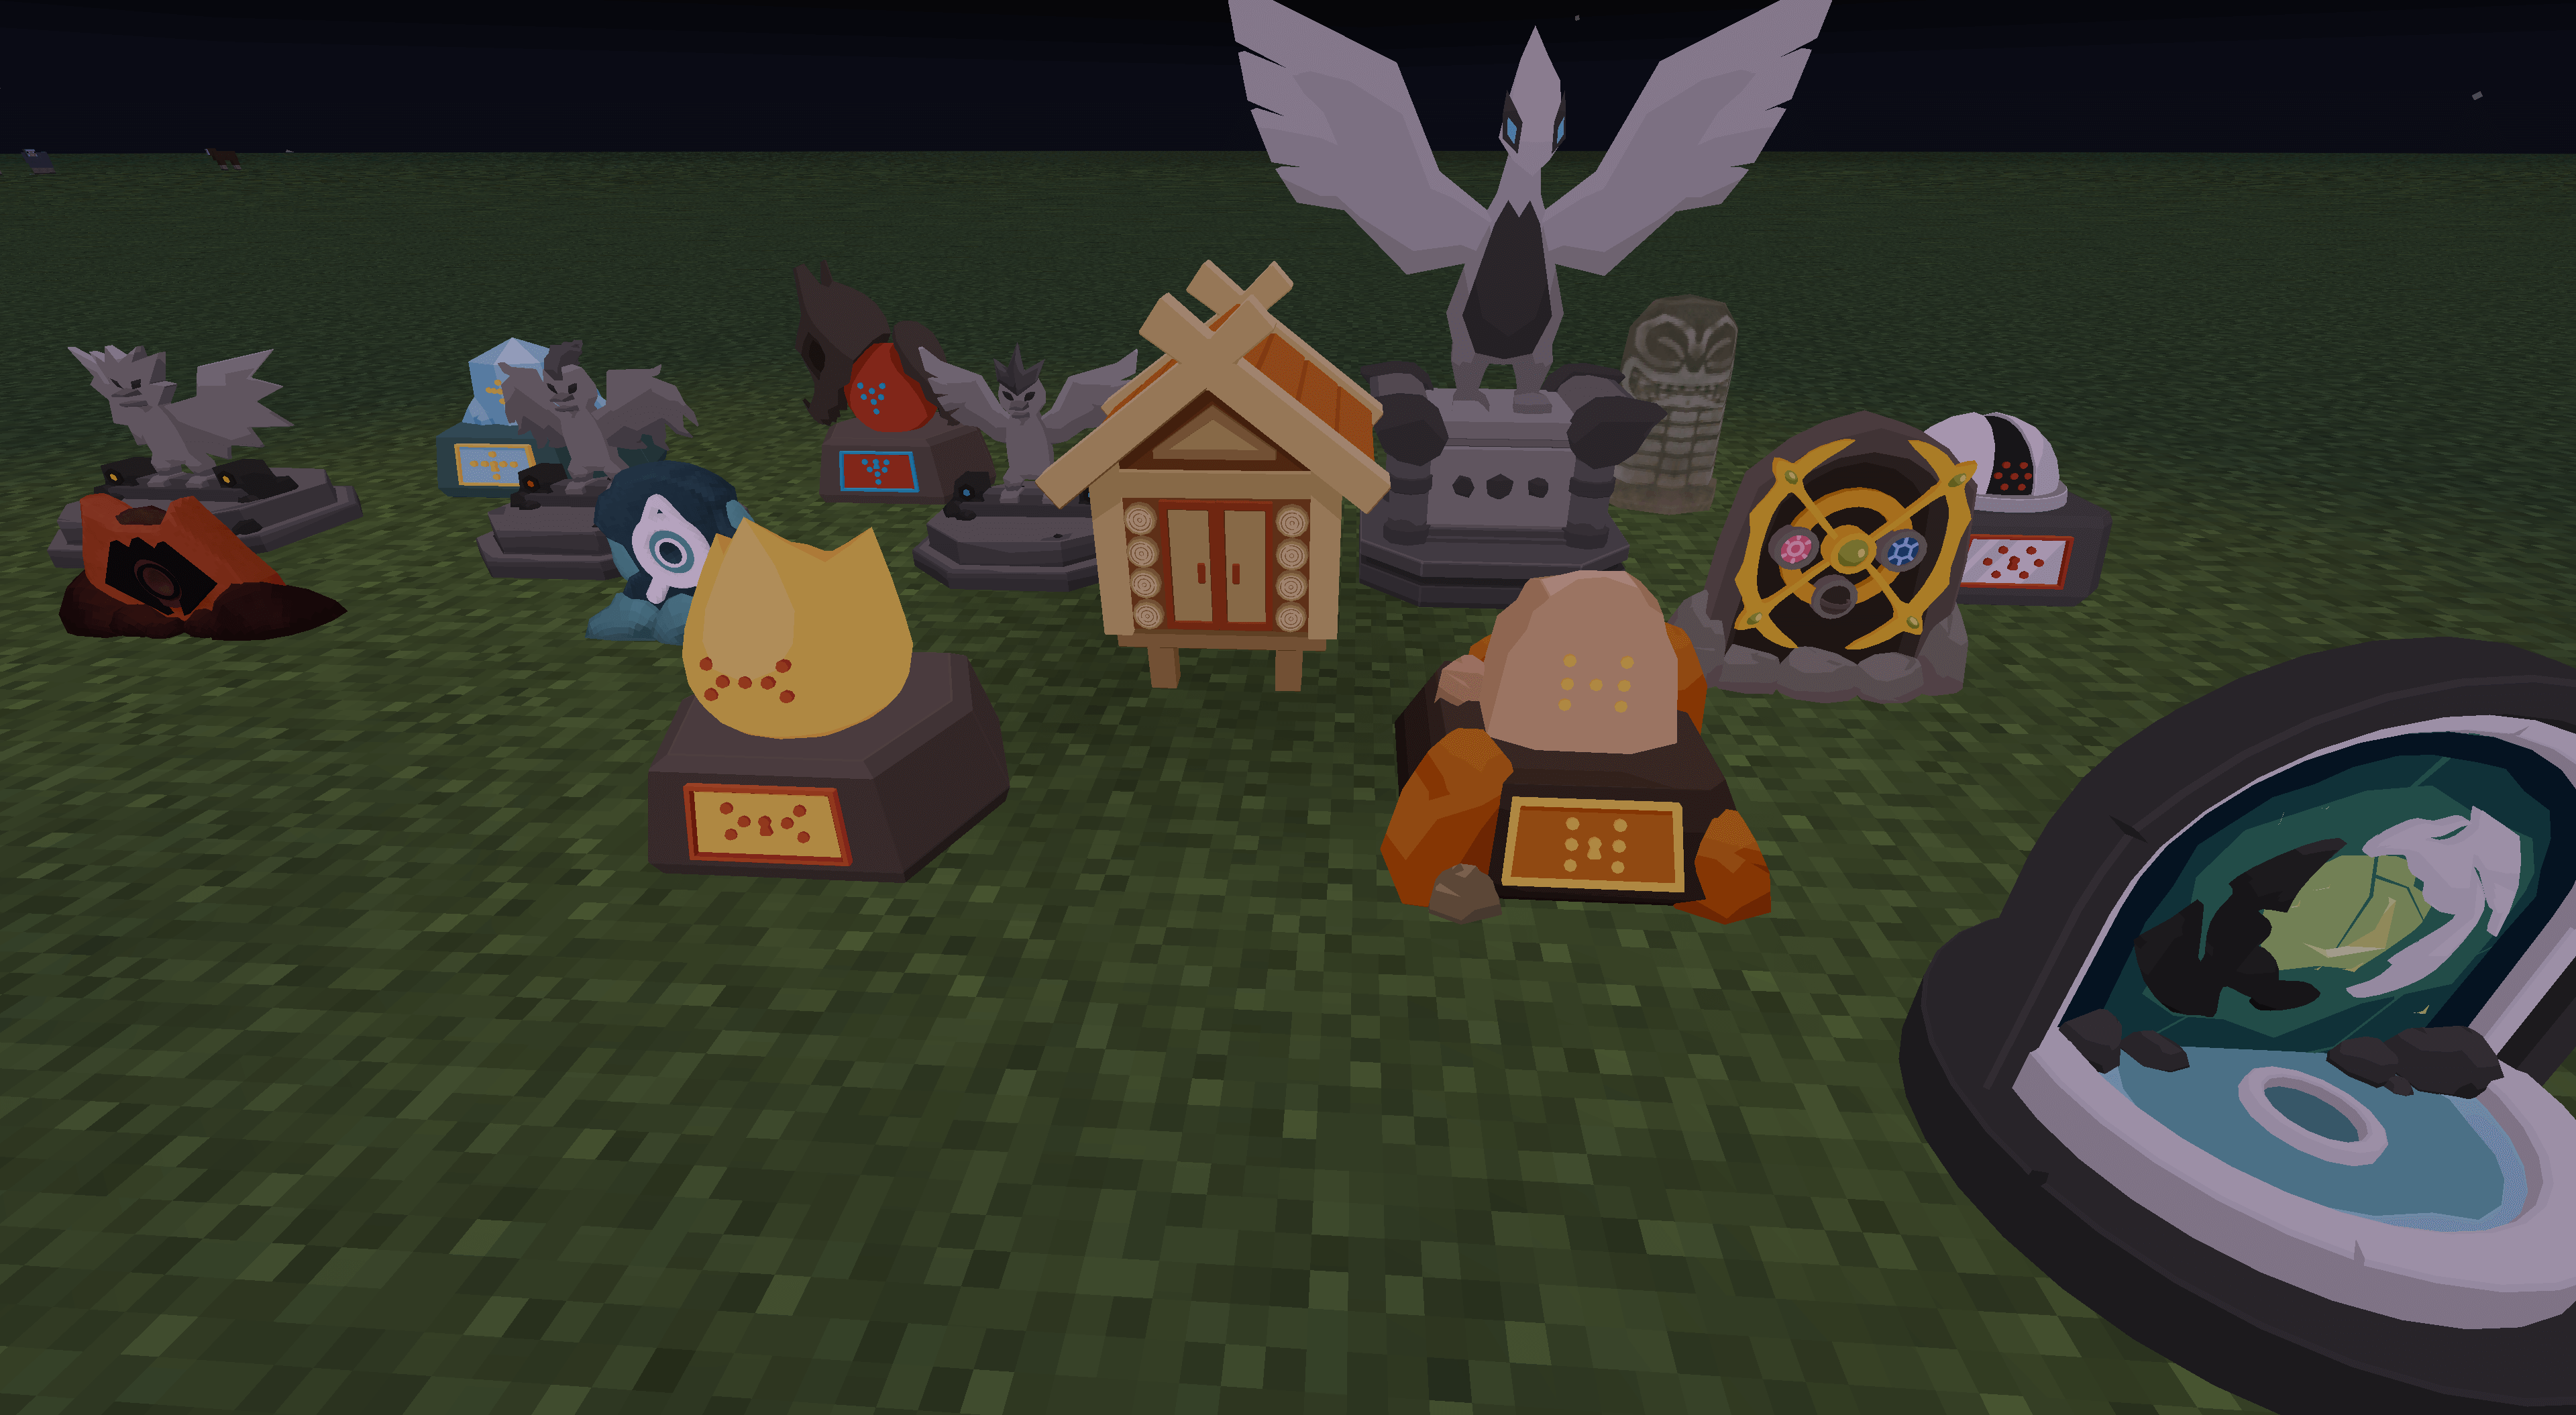 An image of some of the legendary shrines you may find on your adventures